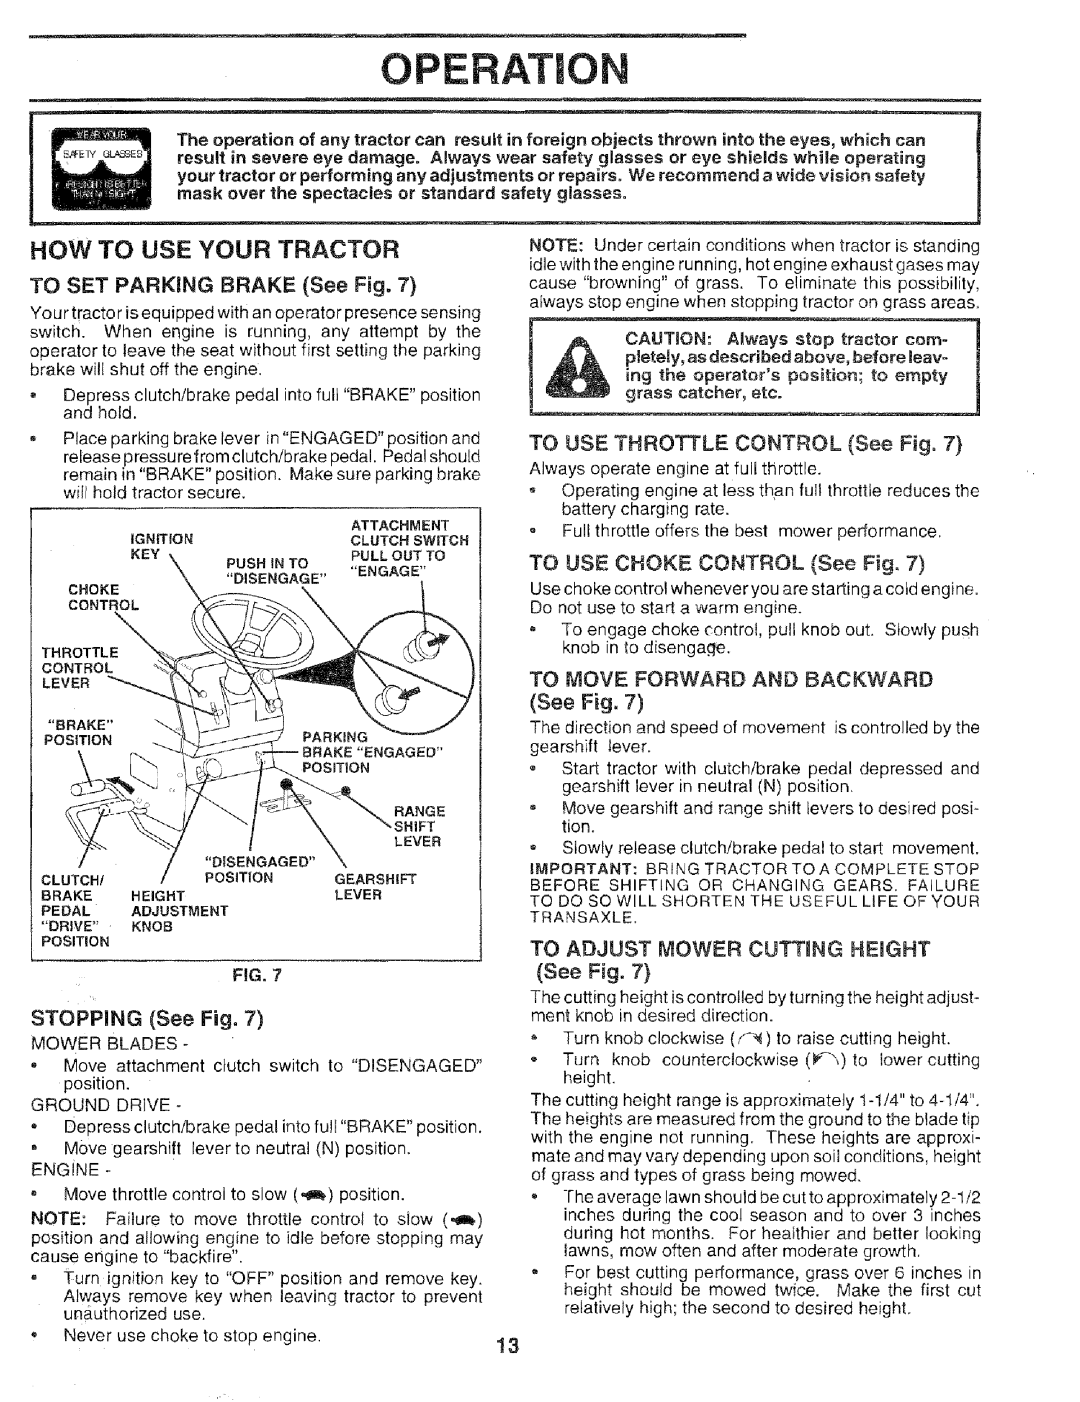 Sears 917.25051 manual How To Use Your Tractor, Operation, TO SET PARKING BRAKE See Fig, TO USE THROTTLE CONTROL See Fig 